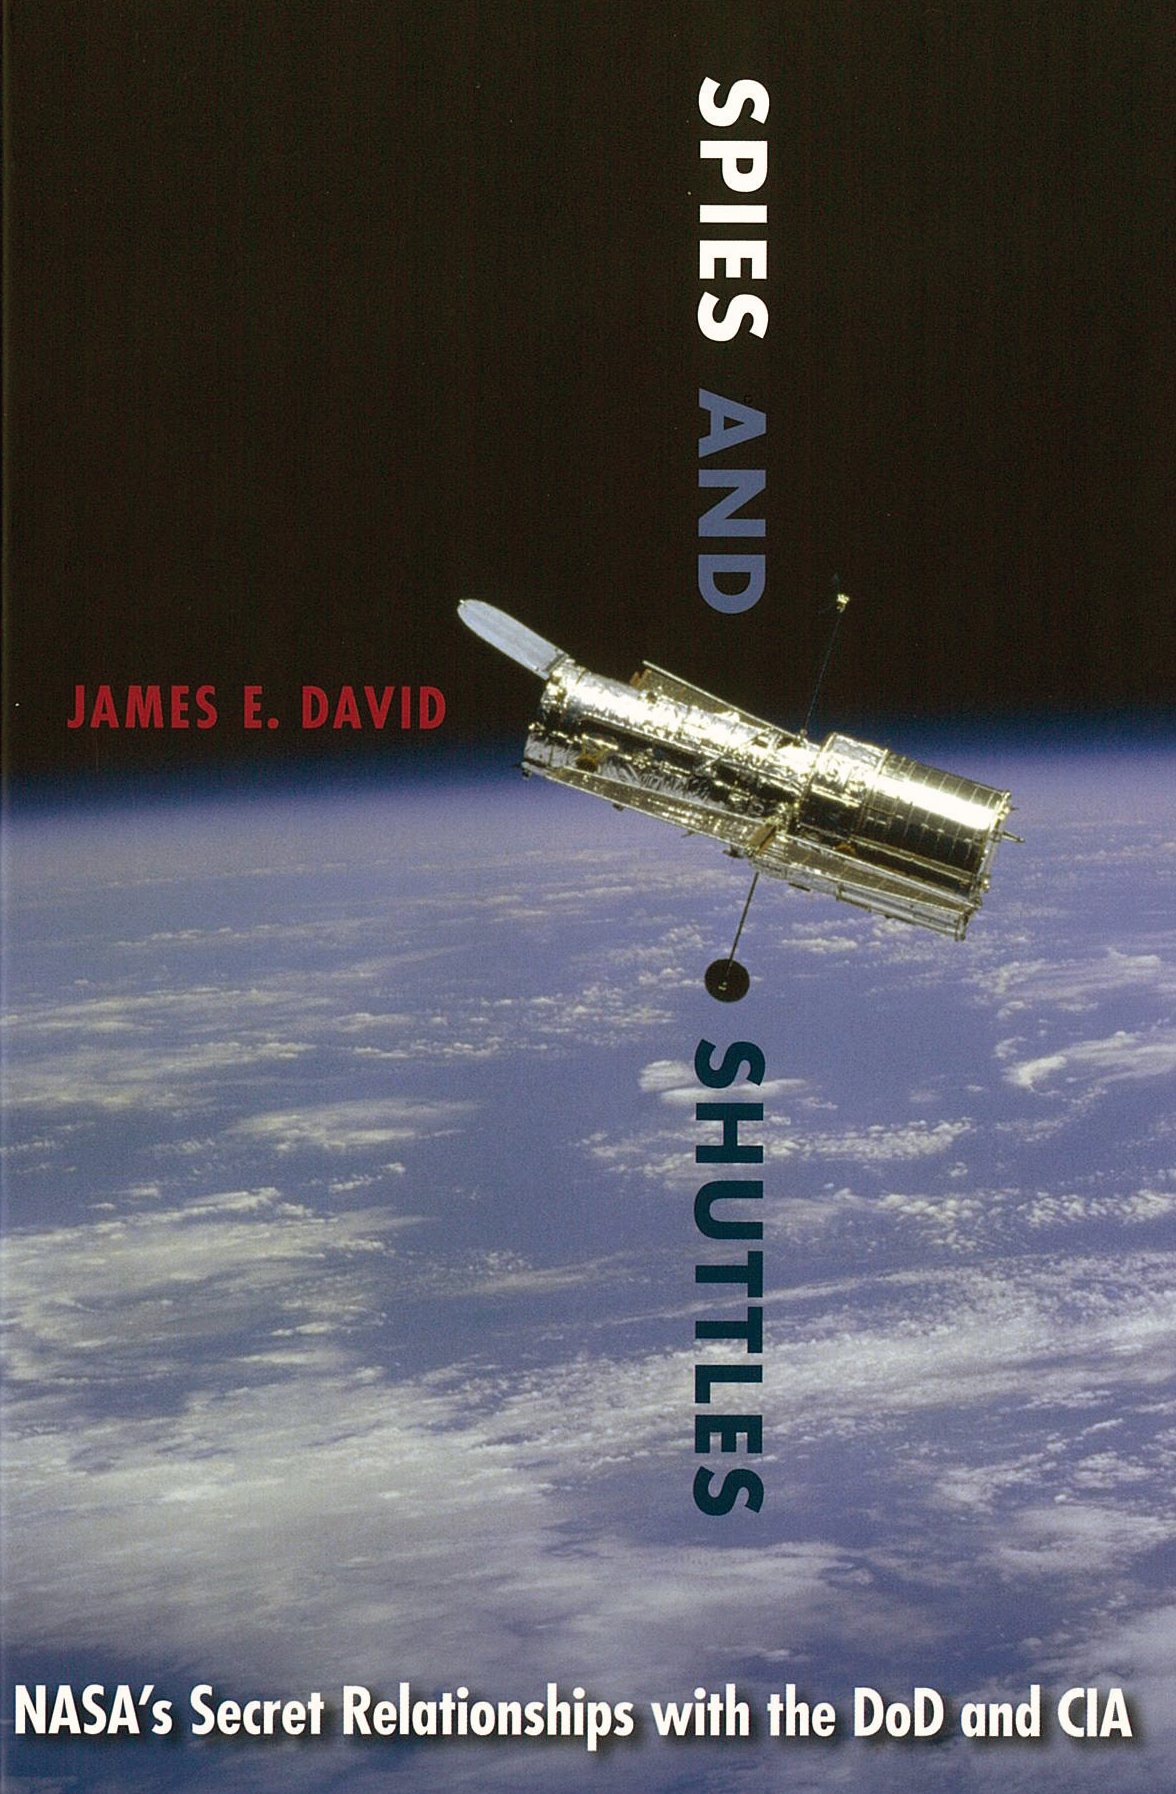 A book cover discussing NASA's relationships with the Department of Defense and the Central Intelligence Agency. The cover features an image of a golden-colored spacecraft orbiting over Earth.